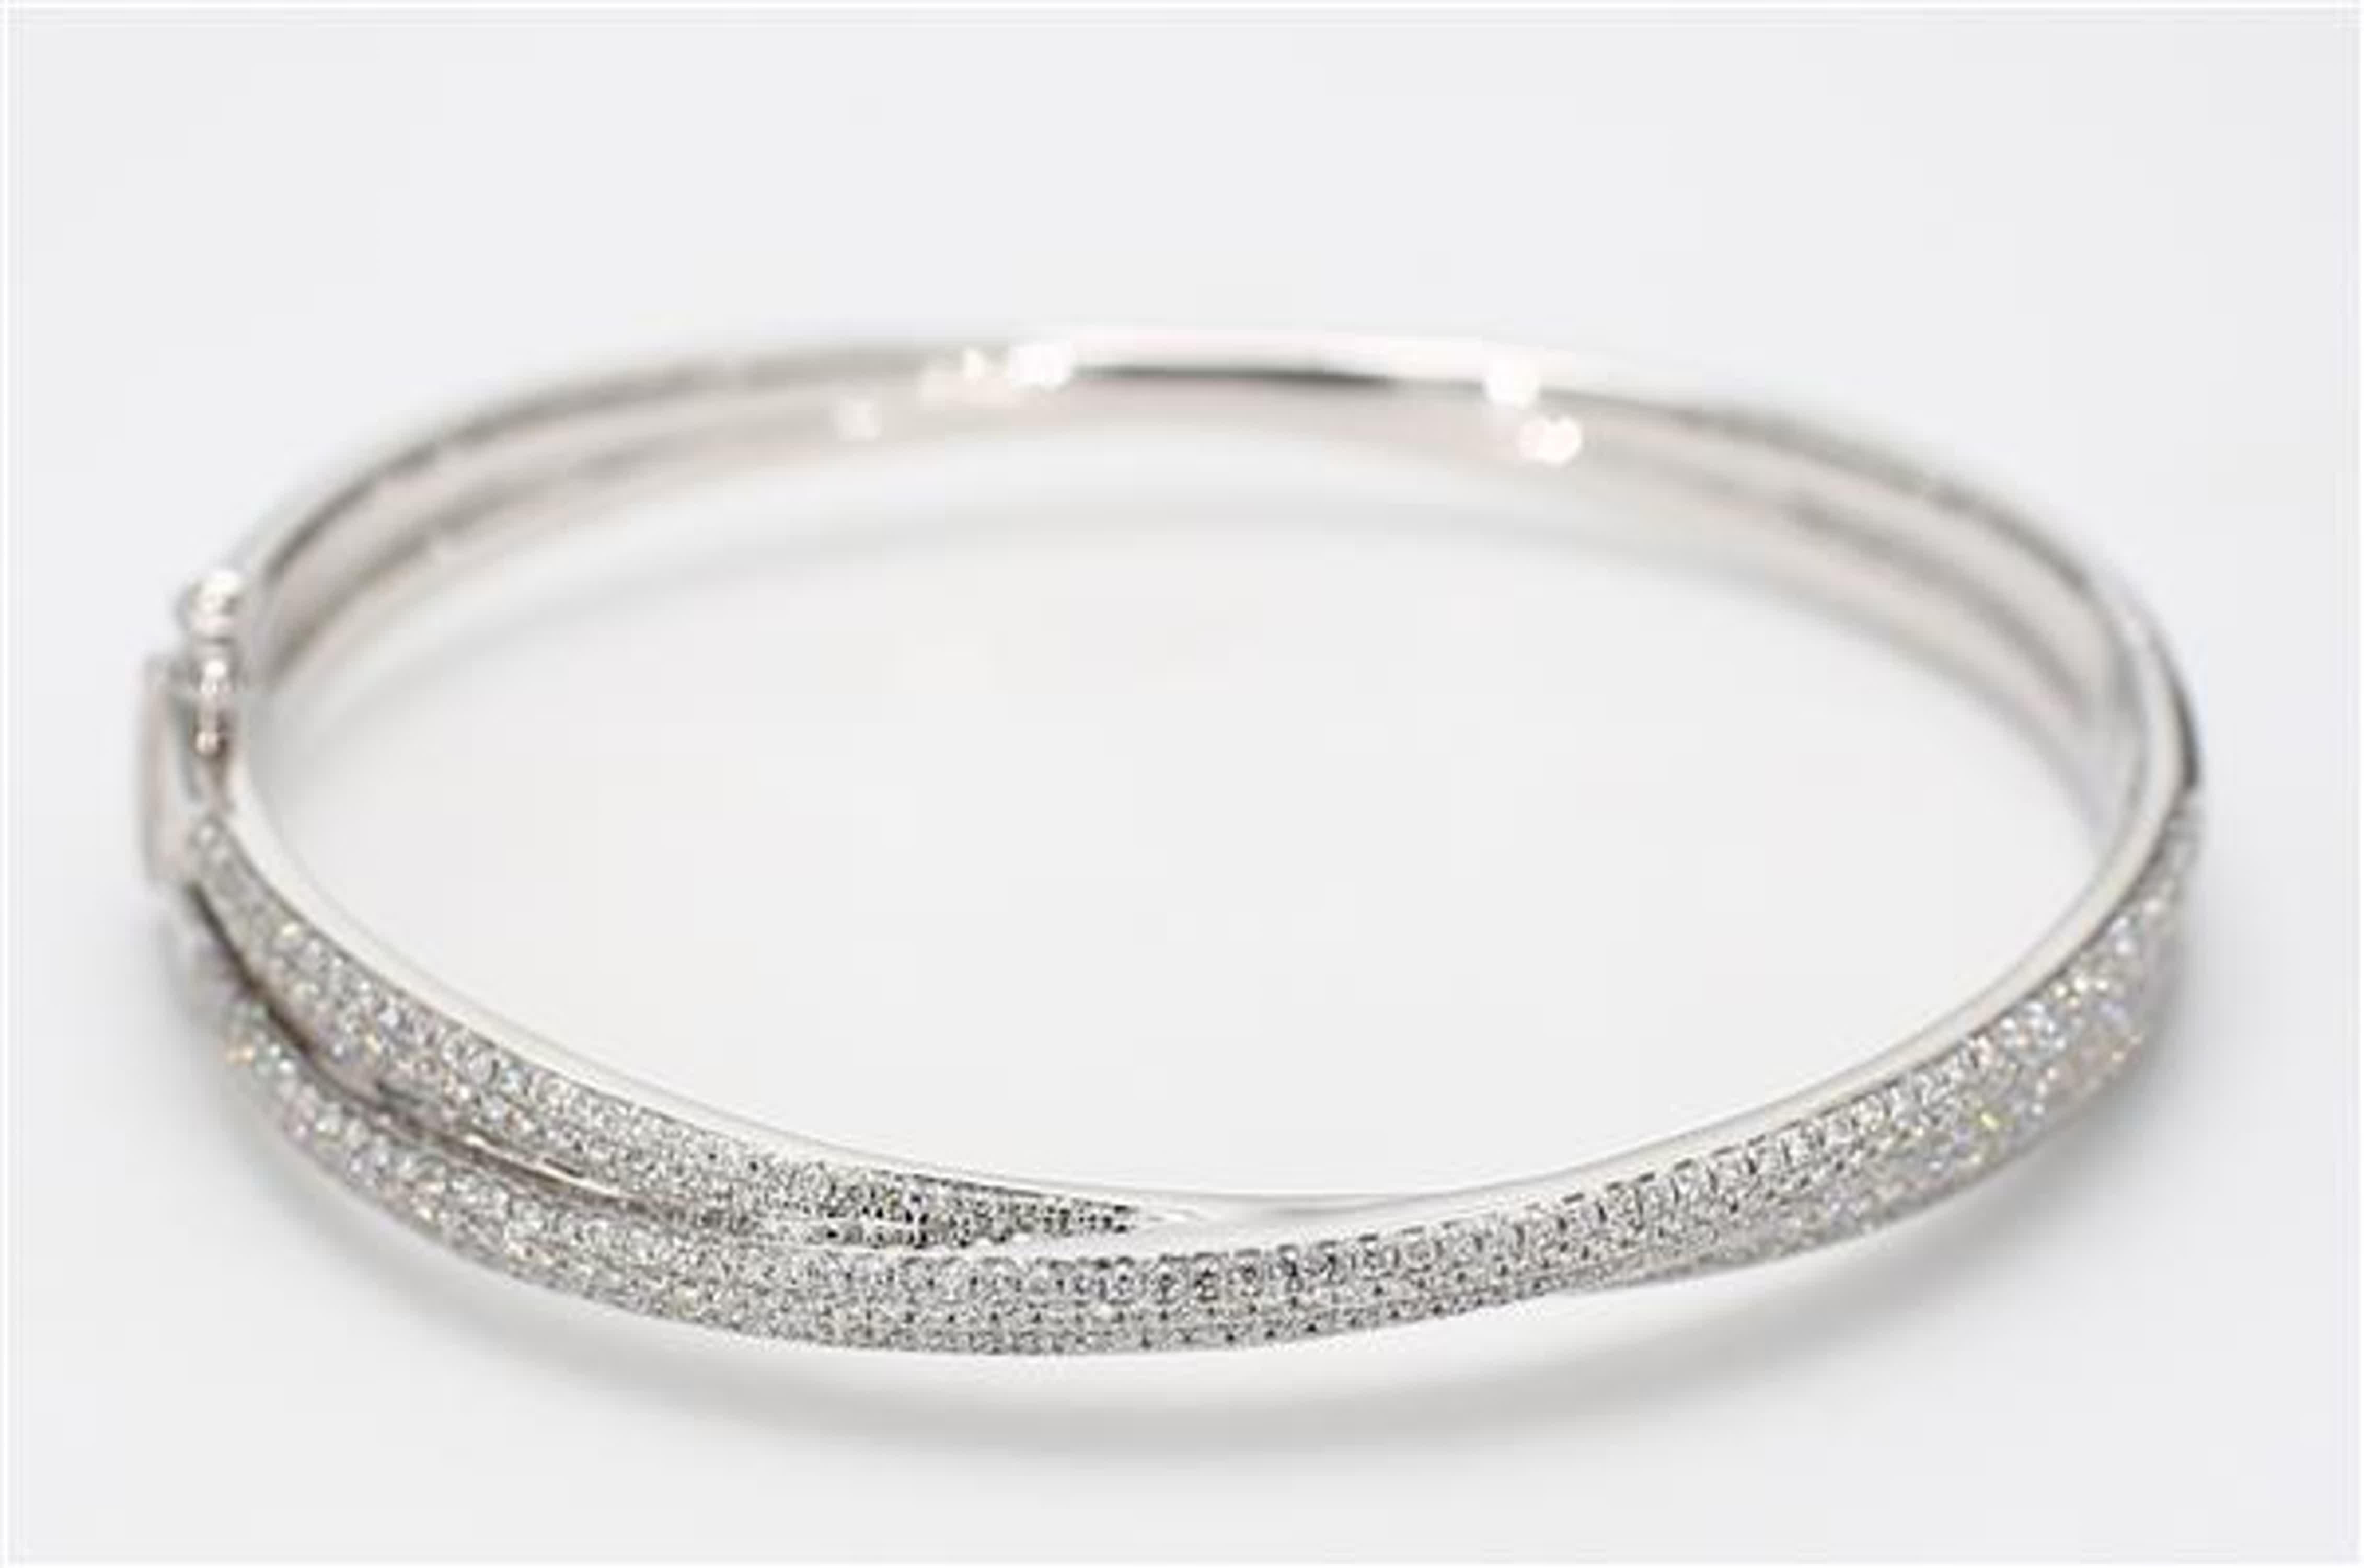 RareGemWorld's classic diamond bracelet. Mounted in a beautiful 18K White Gold setting with round natural white diamond melee. This bracelet is guaranteed to impress and enhance your personal collection.

Total Weight: 1.55cts

Natural Round White